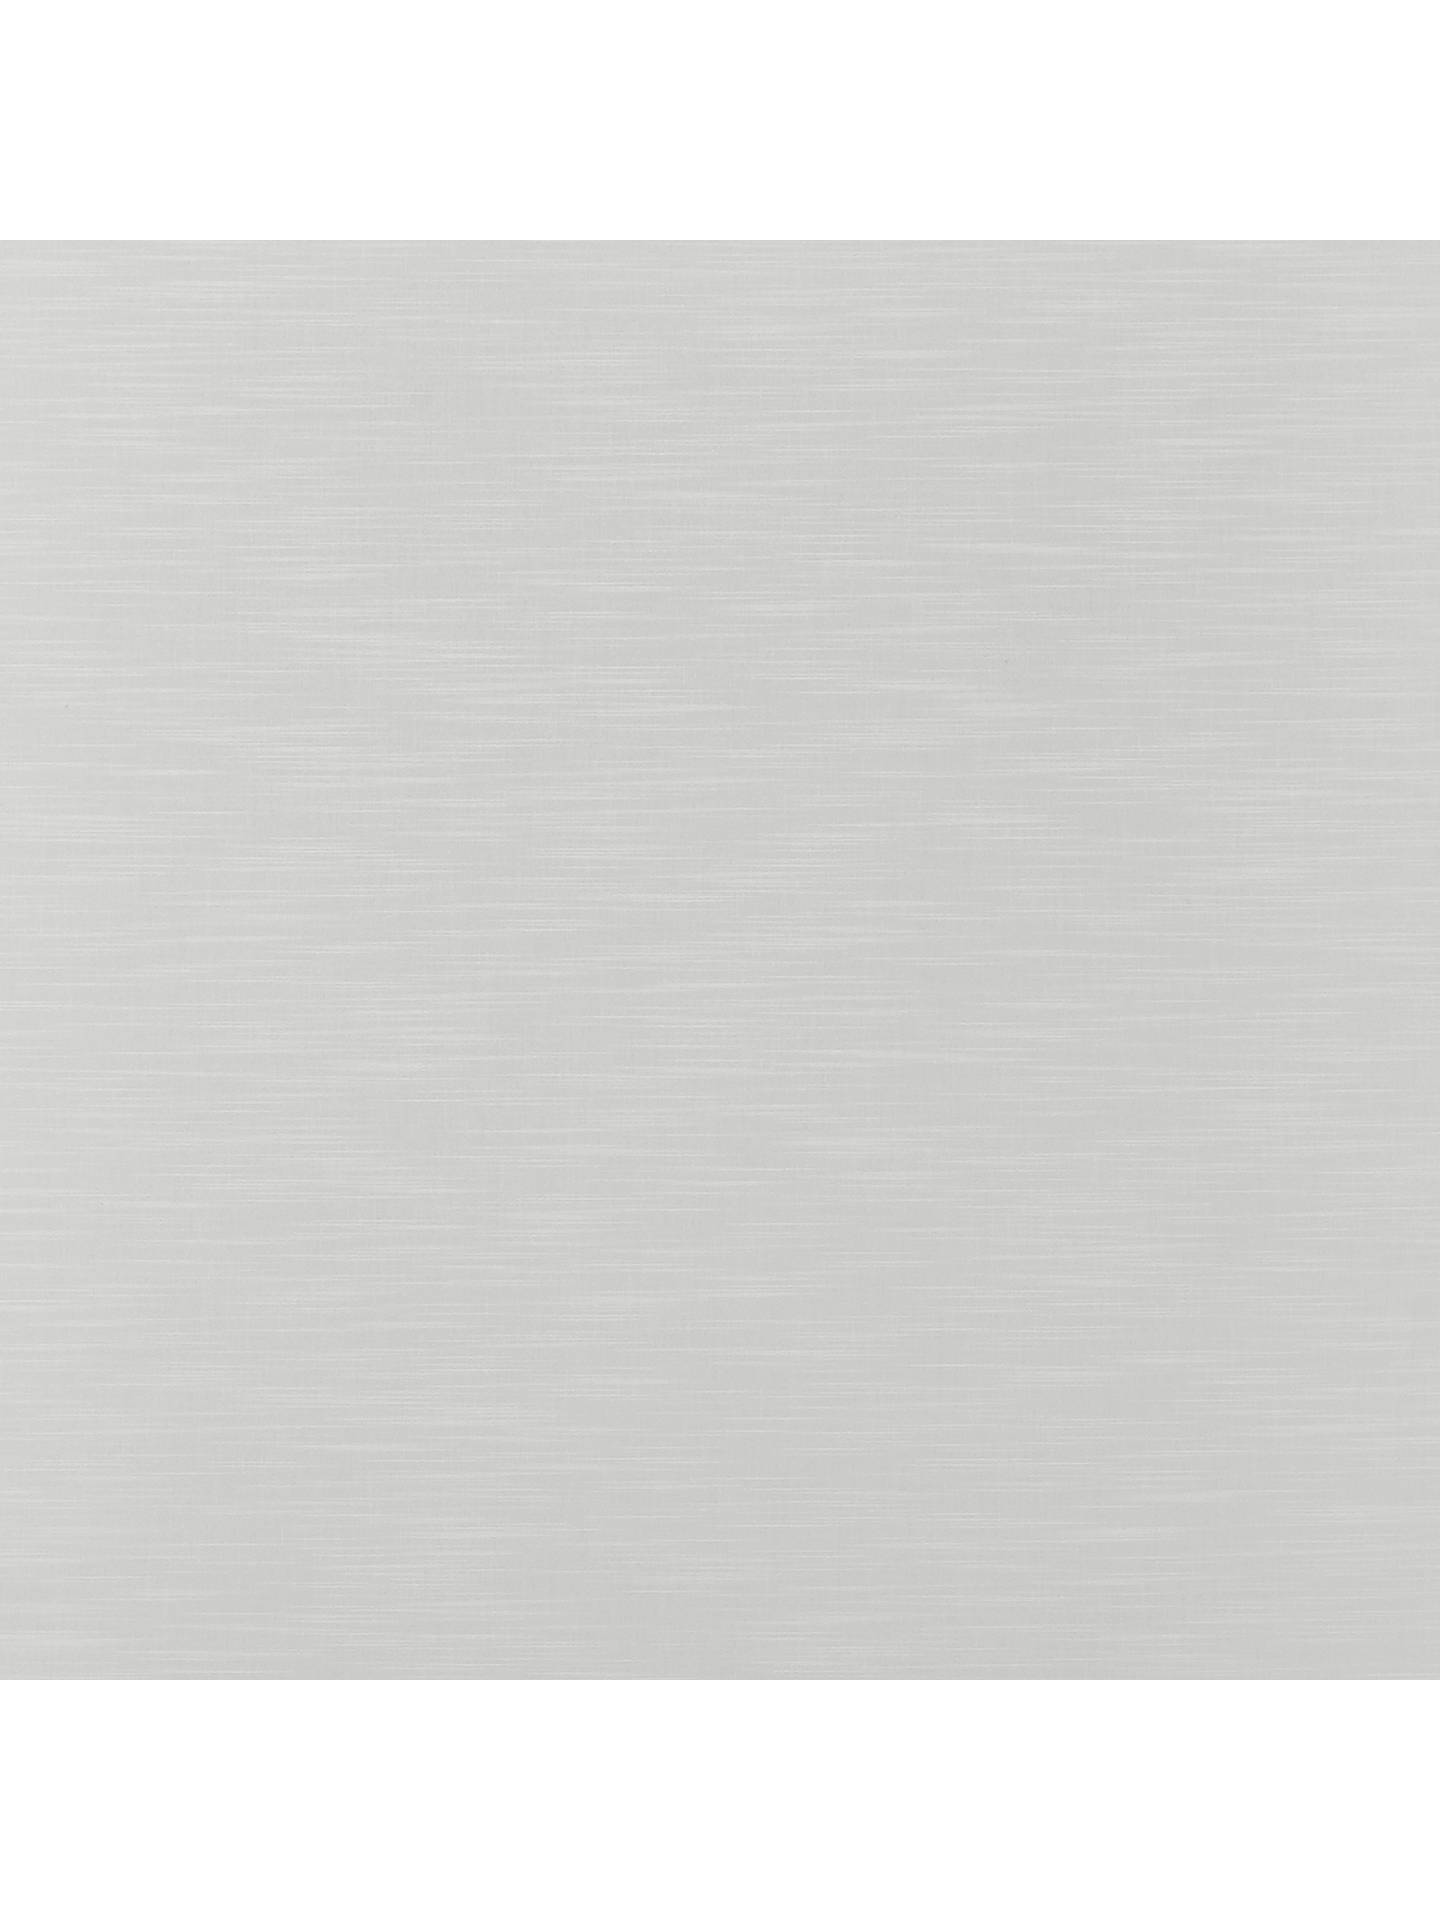 John Lewis Lima Made to Measure Daylight Roller Blind, White